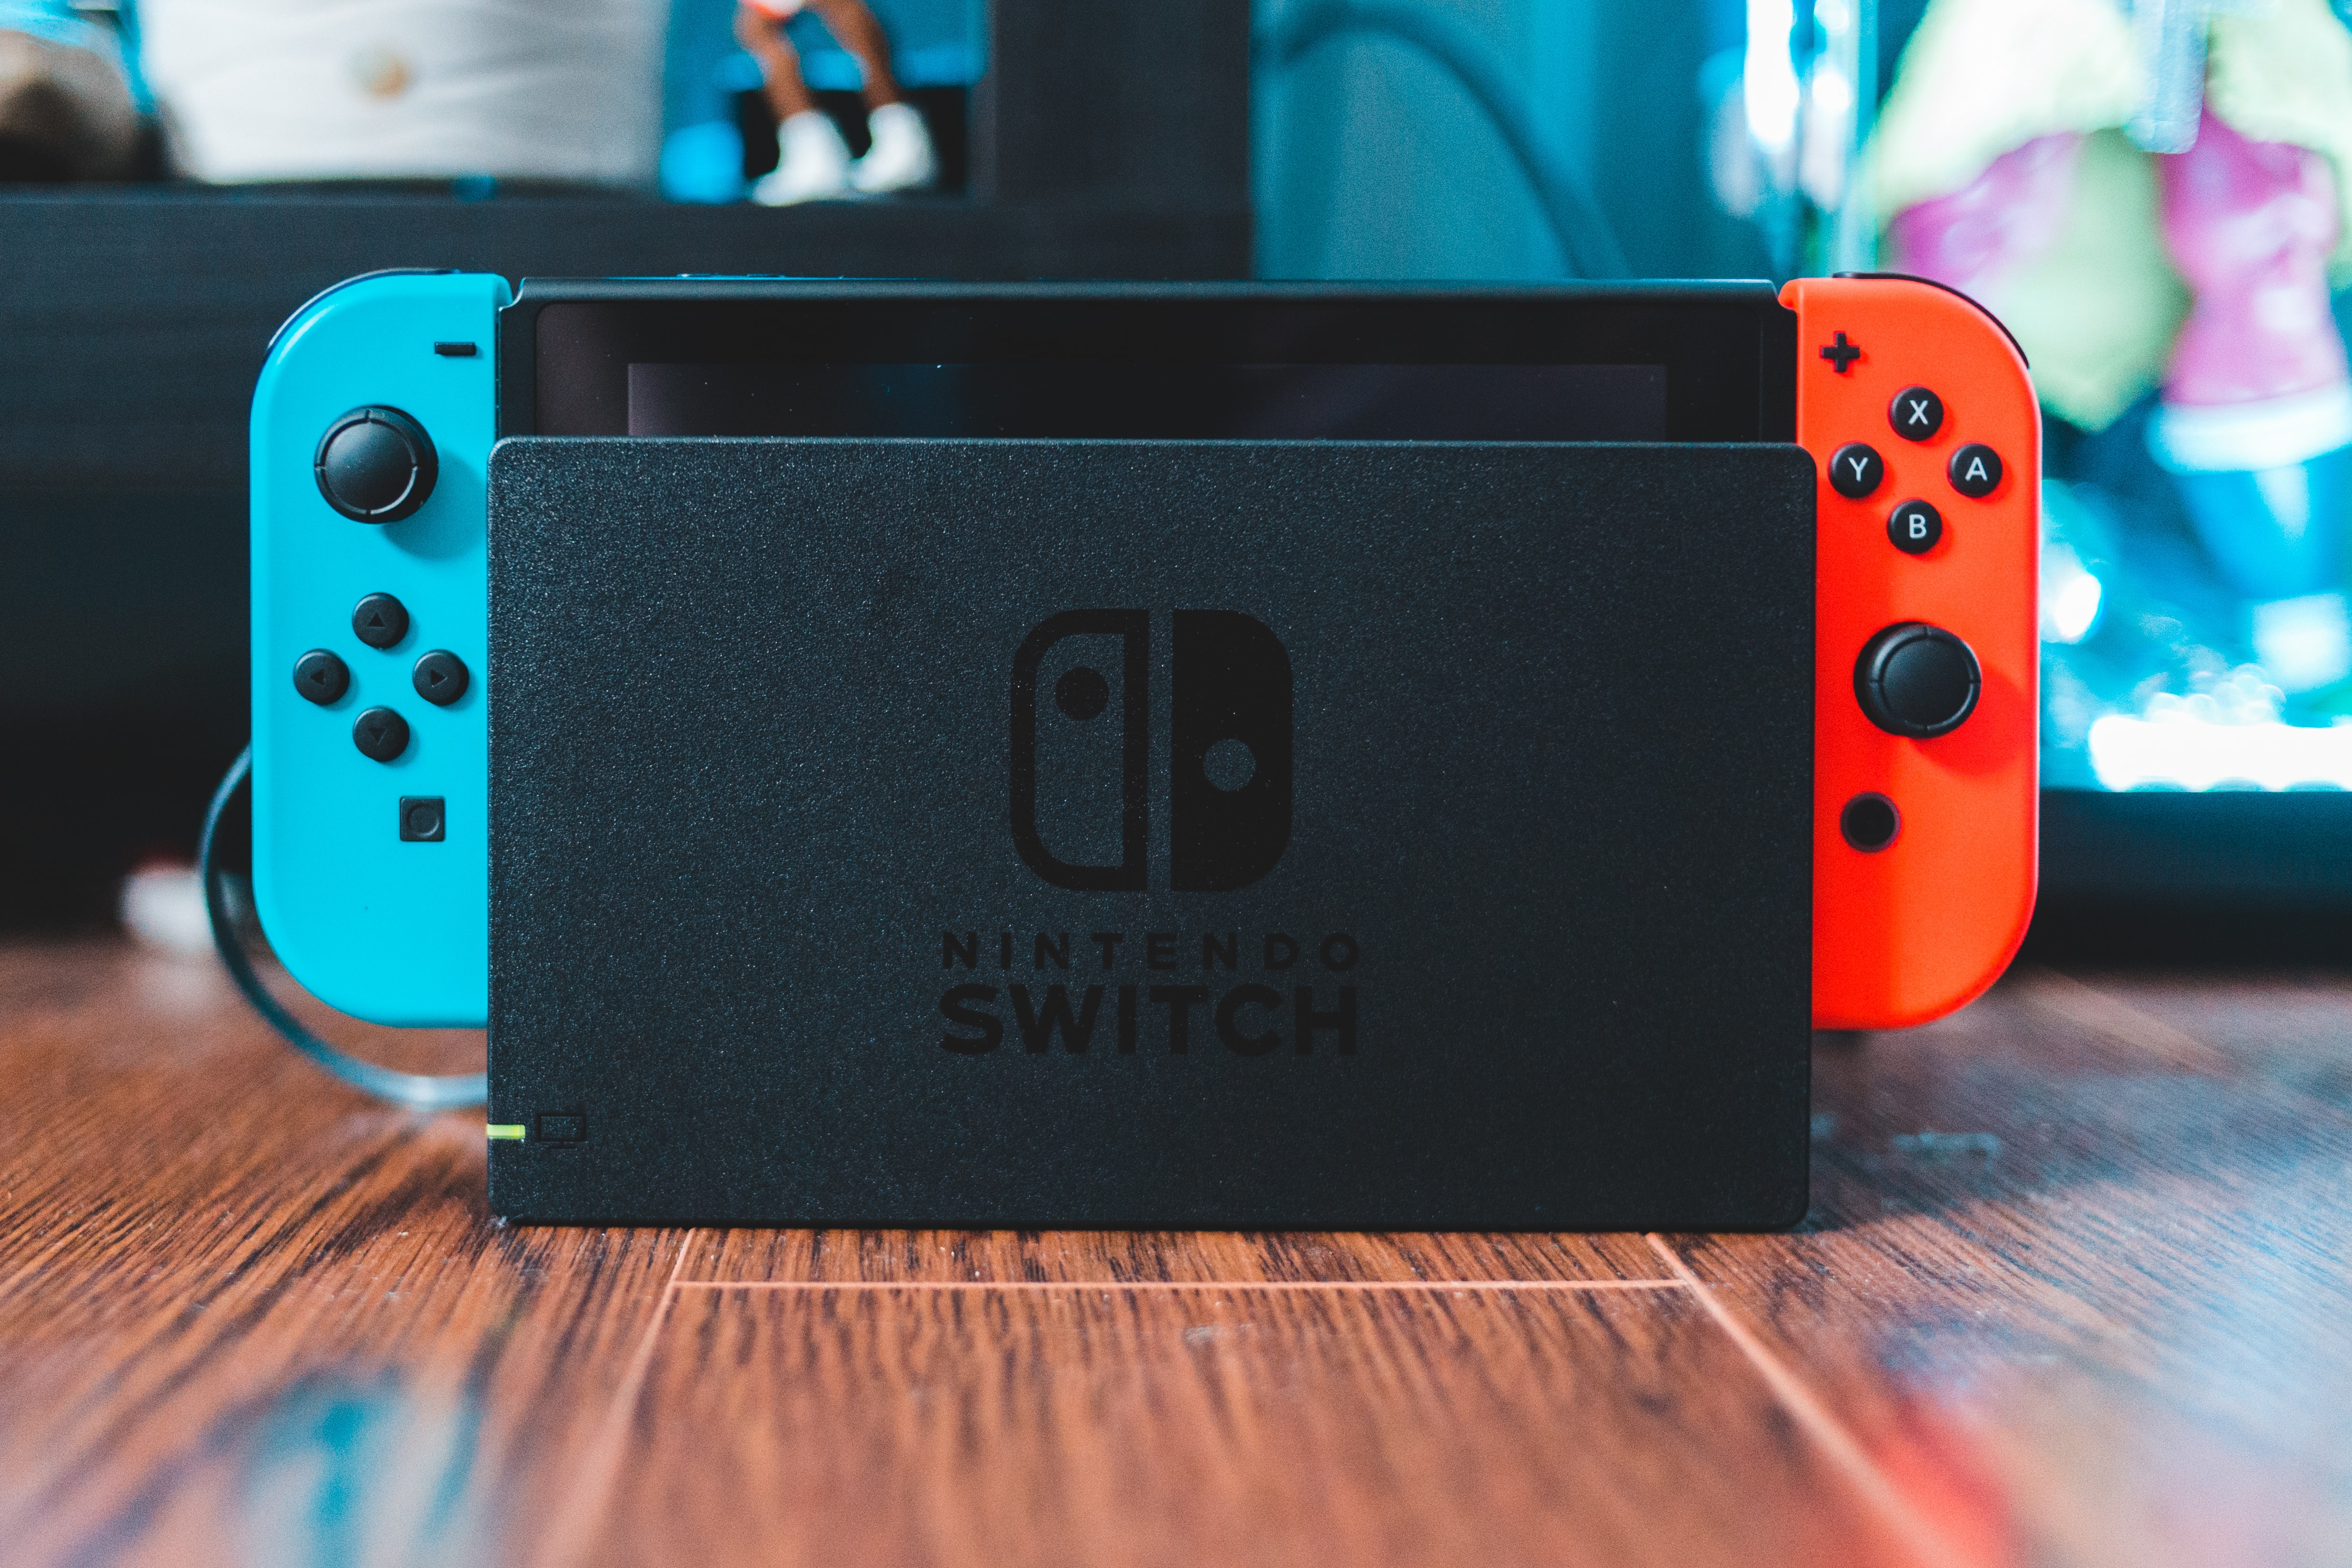 Nintendo Switch Pro is officially announced as 'OLED model